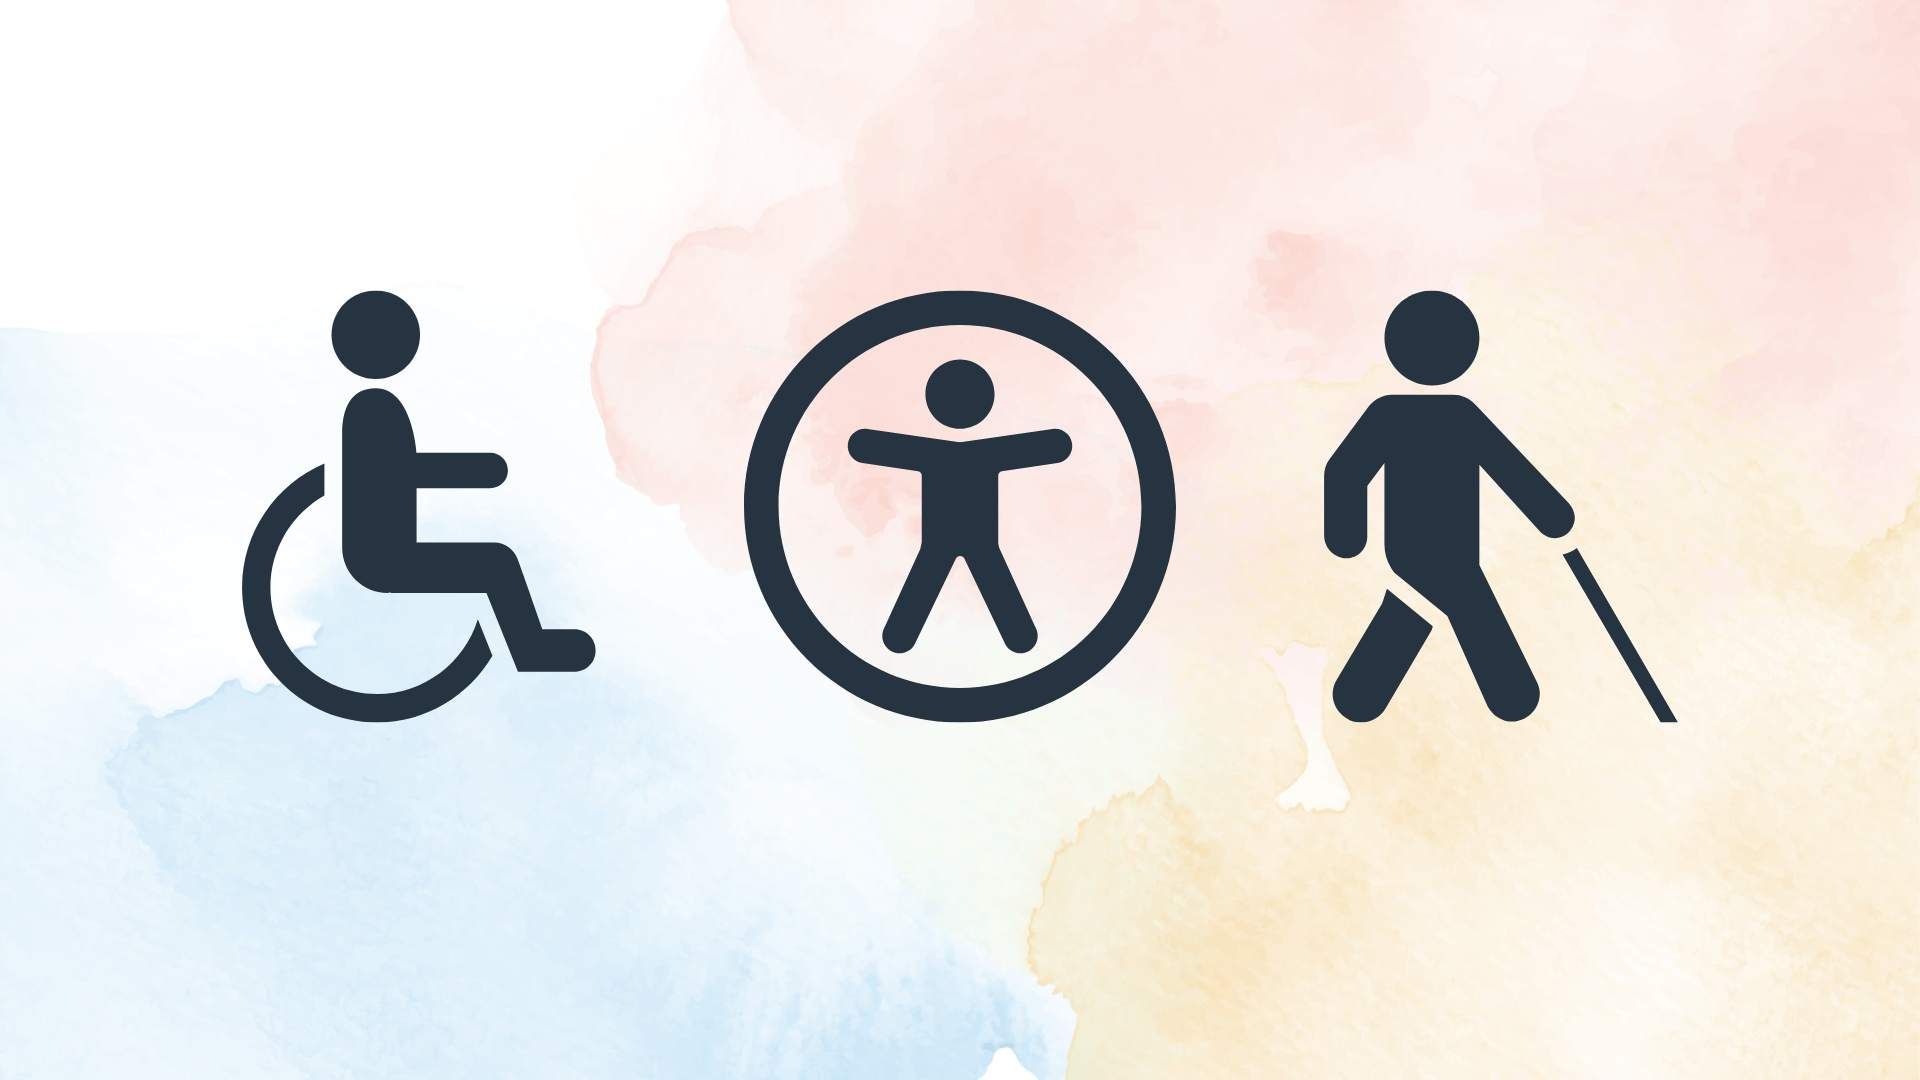 Three stylized silhouettes of people, one sits in a wheelchair, one holds a walking stick, and the last one is inside a circle and spreads their arms and legs. The background is white with some light blue, yellow and red watercolor drops.